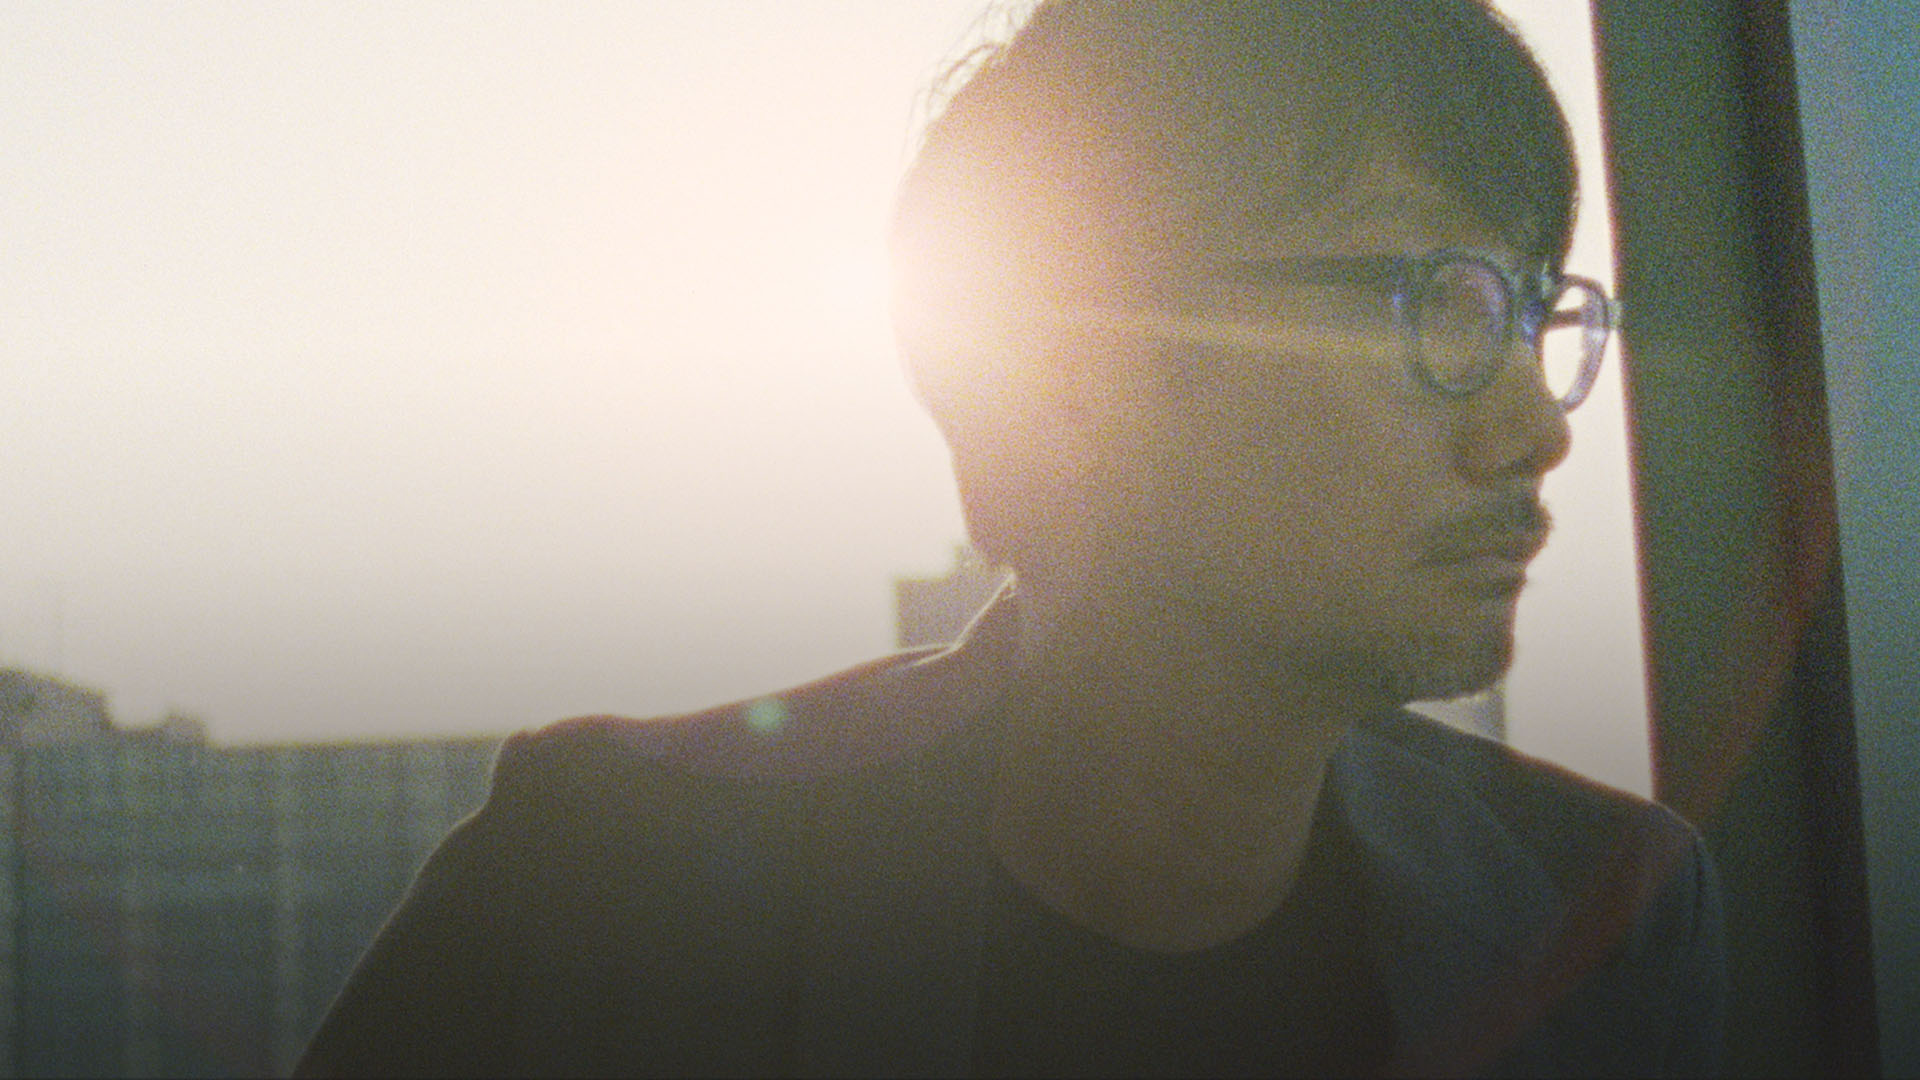 505 Games » FIRST “HIDEO KOJIMA: CONNECTING WORLDS” DOCUMENTARY TRAILER  REVEALED